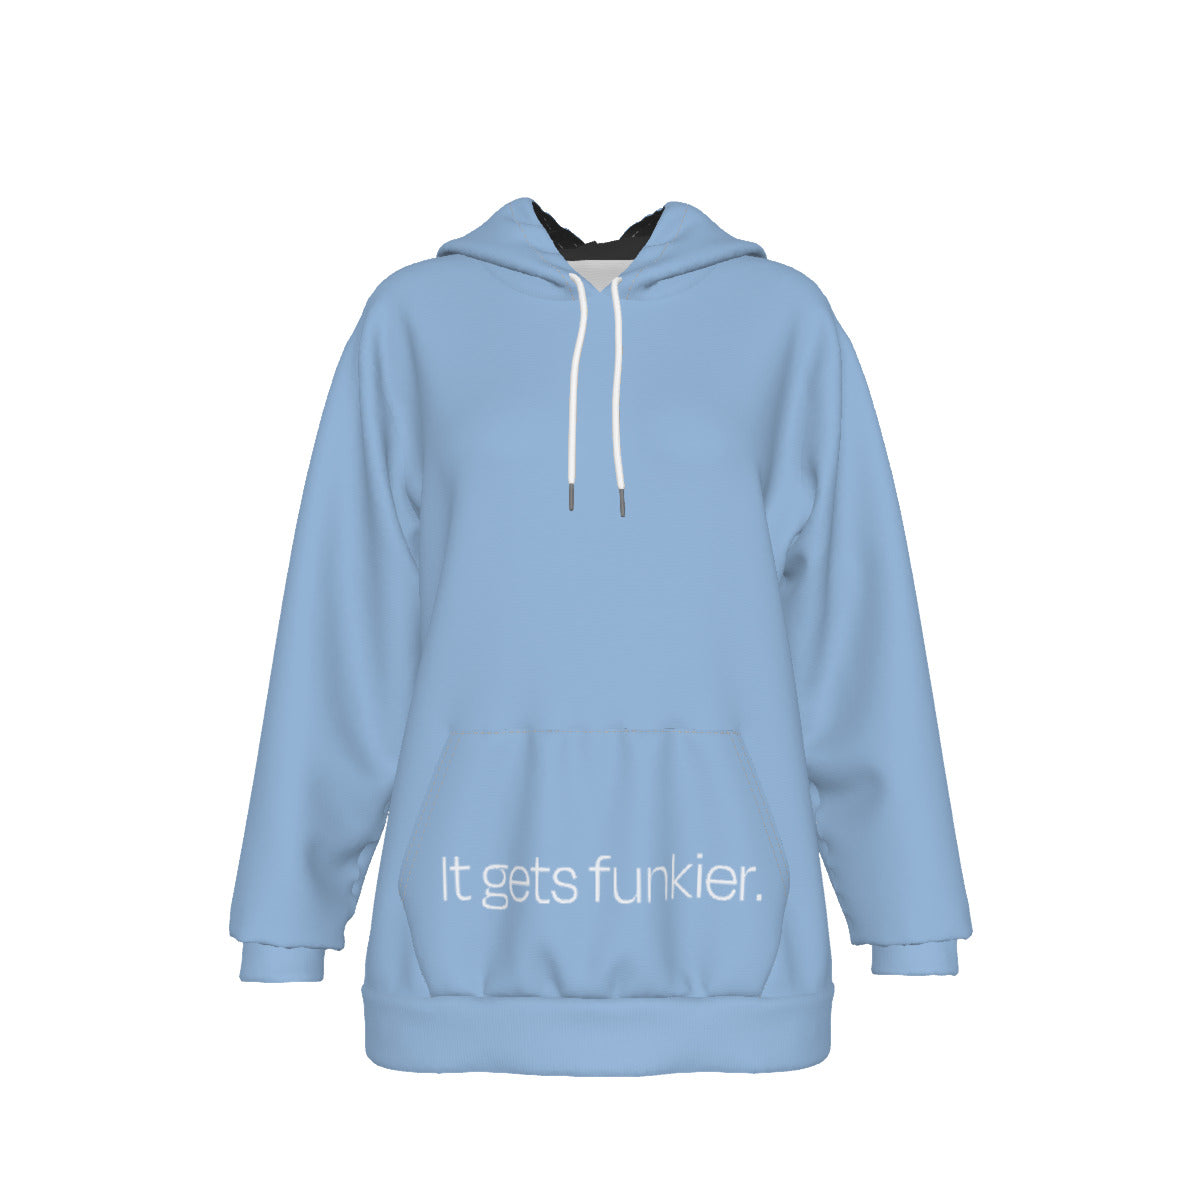 Vulfpeck VOSM Collection - It Gets Funkier All-Over Print Women's Heavy Fleece Hoodie